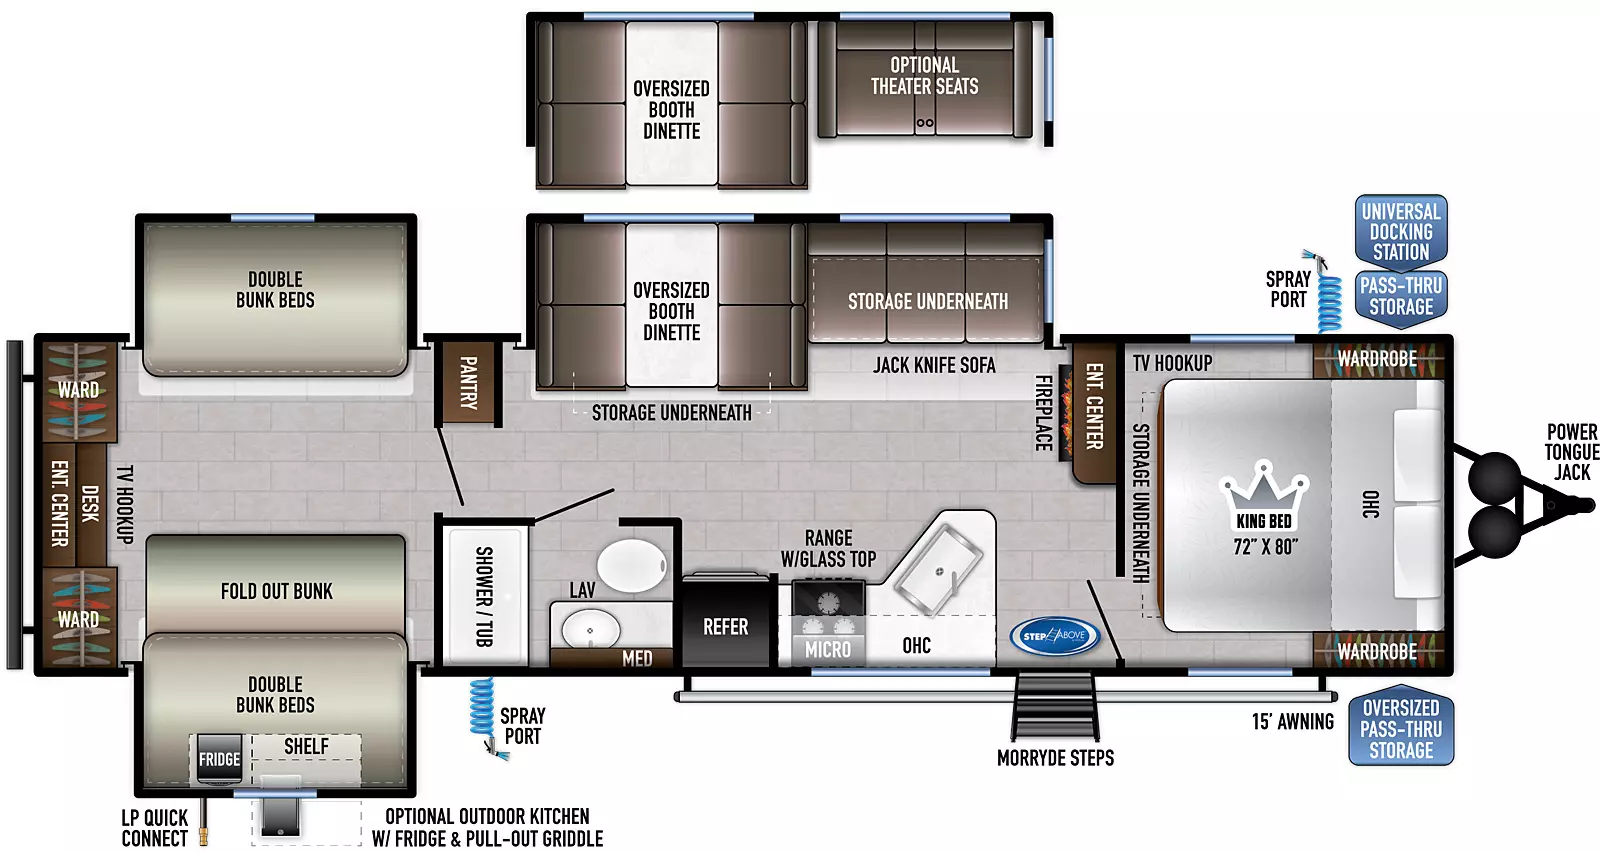 The 323QB has three slides – two opposing slides in the rear bunk area of the coach (one on door side, one across on off-door side) the third one is on the off-door side in the kitchen living dining area.  Interior layout from front to back: front bedroom with king bed featuring overhead cabinets, bedside wards, TV hookup, underbed storage and solid privacy door; kitchen living dining area includes entertainment center with fireplace, angled residential sink, 3-burner cooktop with oven and overhead microwave plus cabinets, refrigerator; aisle bathroom with tub/shower, medicine cabinet above the sink and porcelain toilet; across in the off-door side slide is the oversized booth dinette and jackknife sofa - both with storage underneath; pantry on off-door side across from bathroom; bunkhouse includes double bunk bends in the off-door side slide; the opposing slide has double bunk beds with one being a fold-out bunk; across rear of bunkhouse is a desk/entertainment center, TV hookup and two wards on each side. Exterior from front to back: Power tongue jack, oversized pass-thru storage on door side, universal docking station in pass-thru on off-door side with spray port; solid steps at main door-side entry, spray port, optional outside kitchen with fridge and pull-out griddle, LP quick connect and 15' awning.  